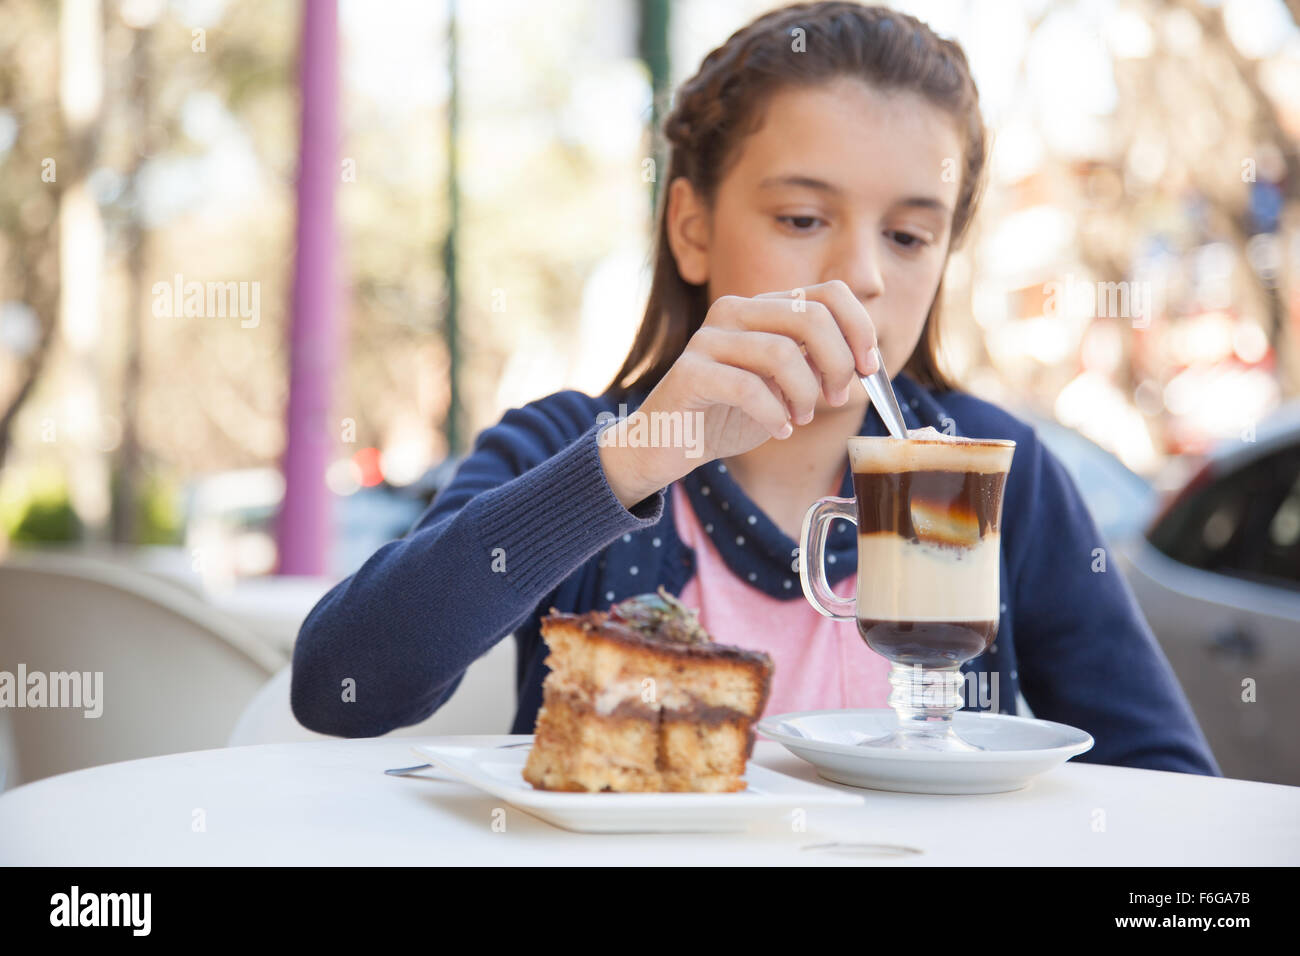 Girl drinking a cup of coffee Stock Photo